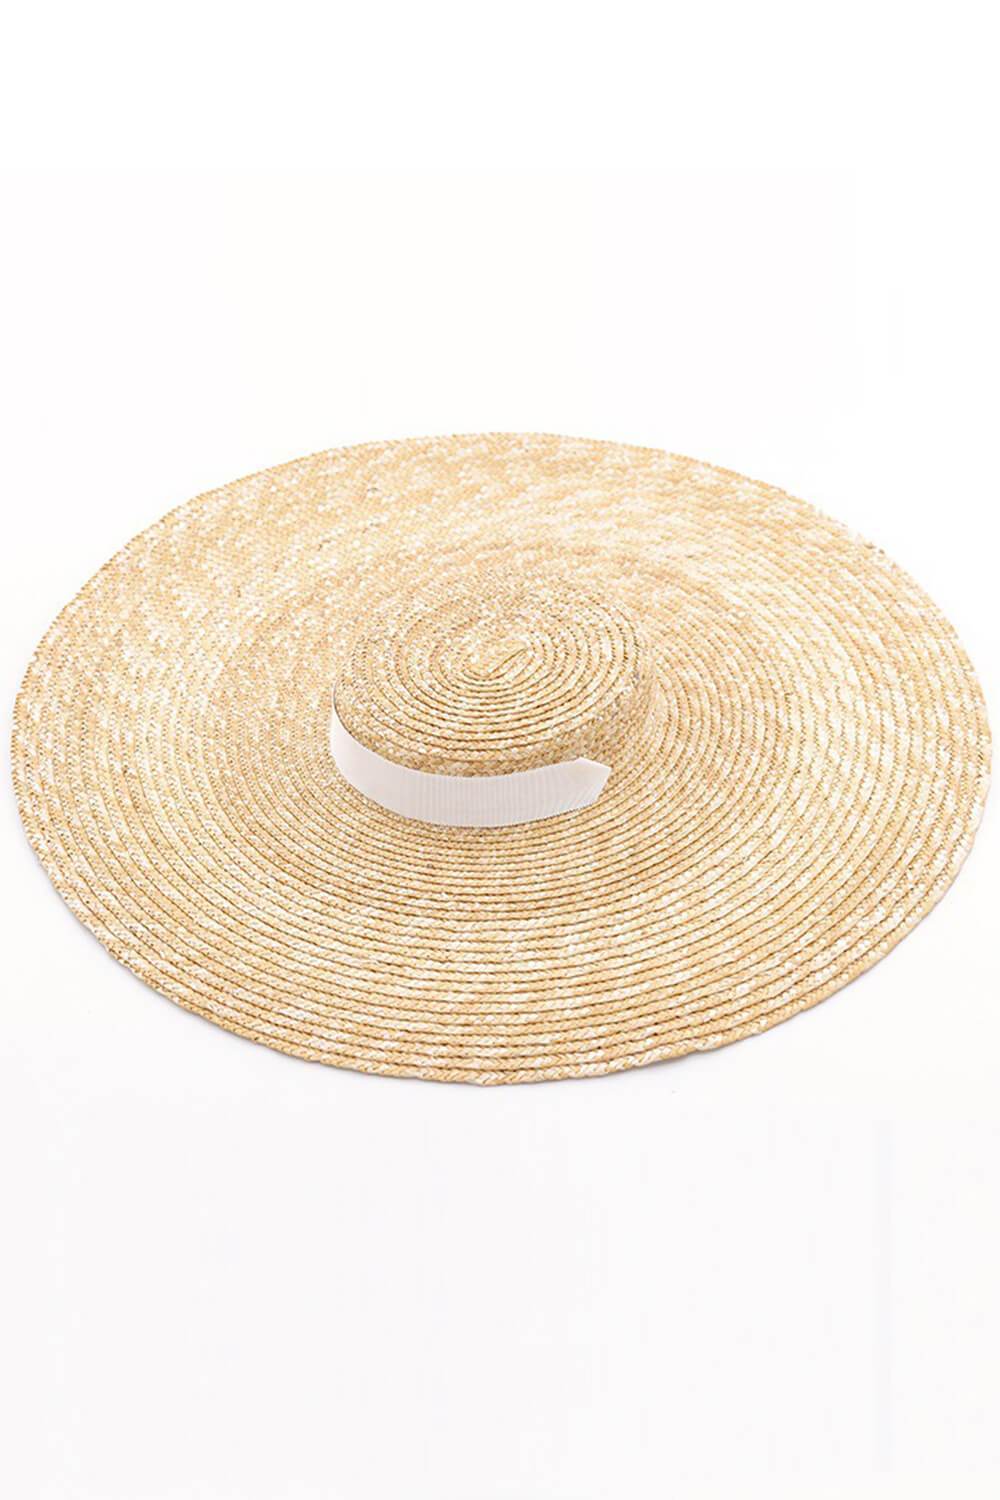 Wheat Straw Extra-Wide Brim Boater With White Chin Tie